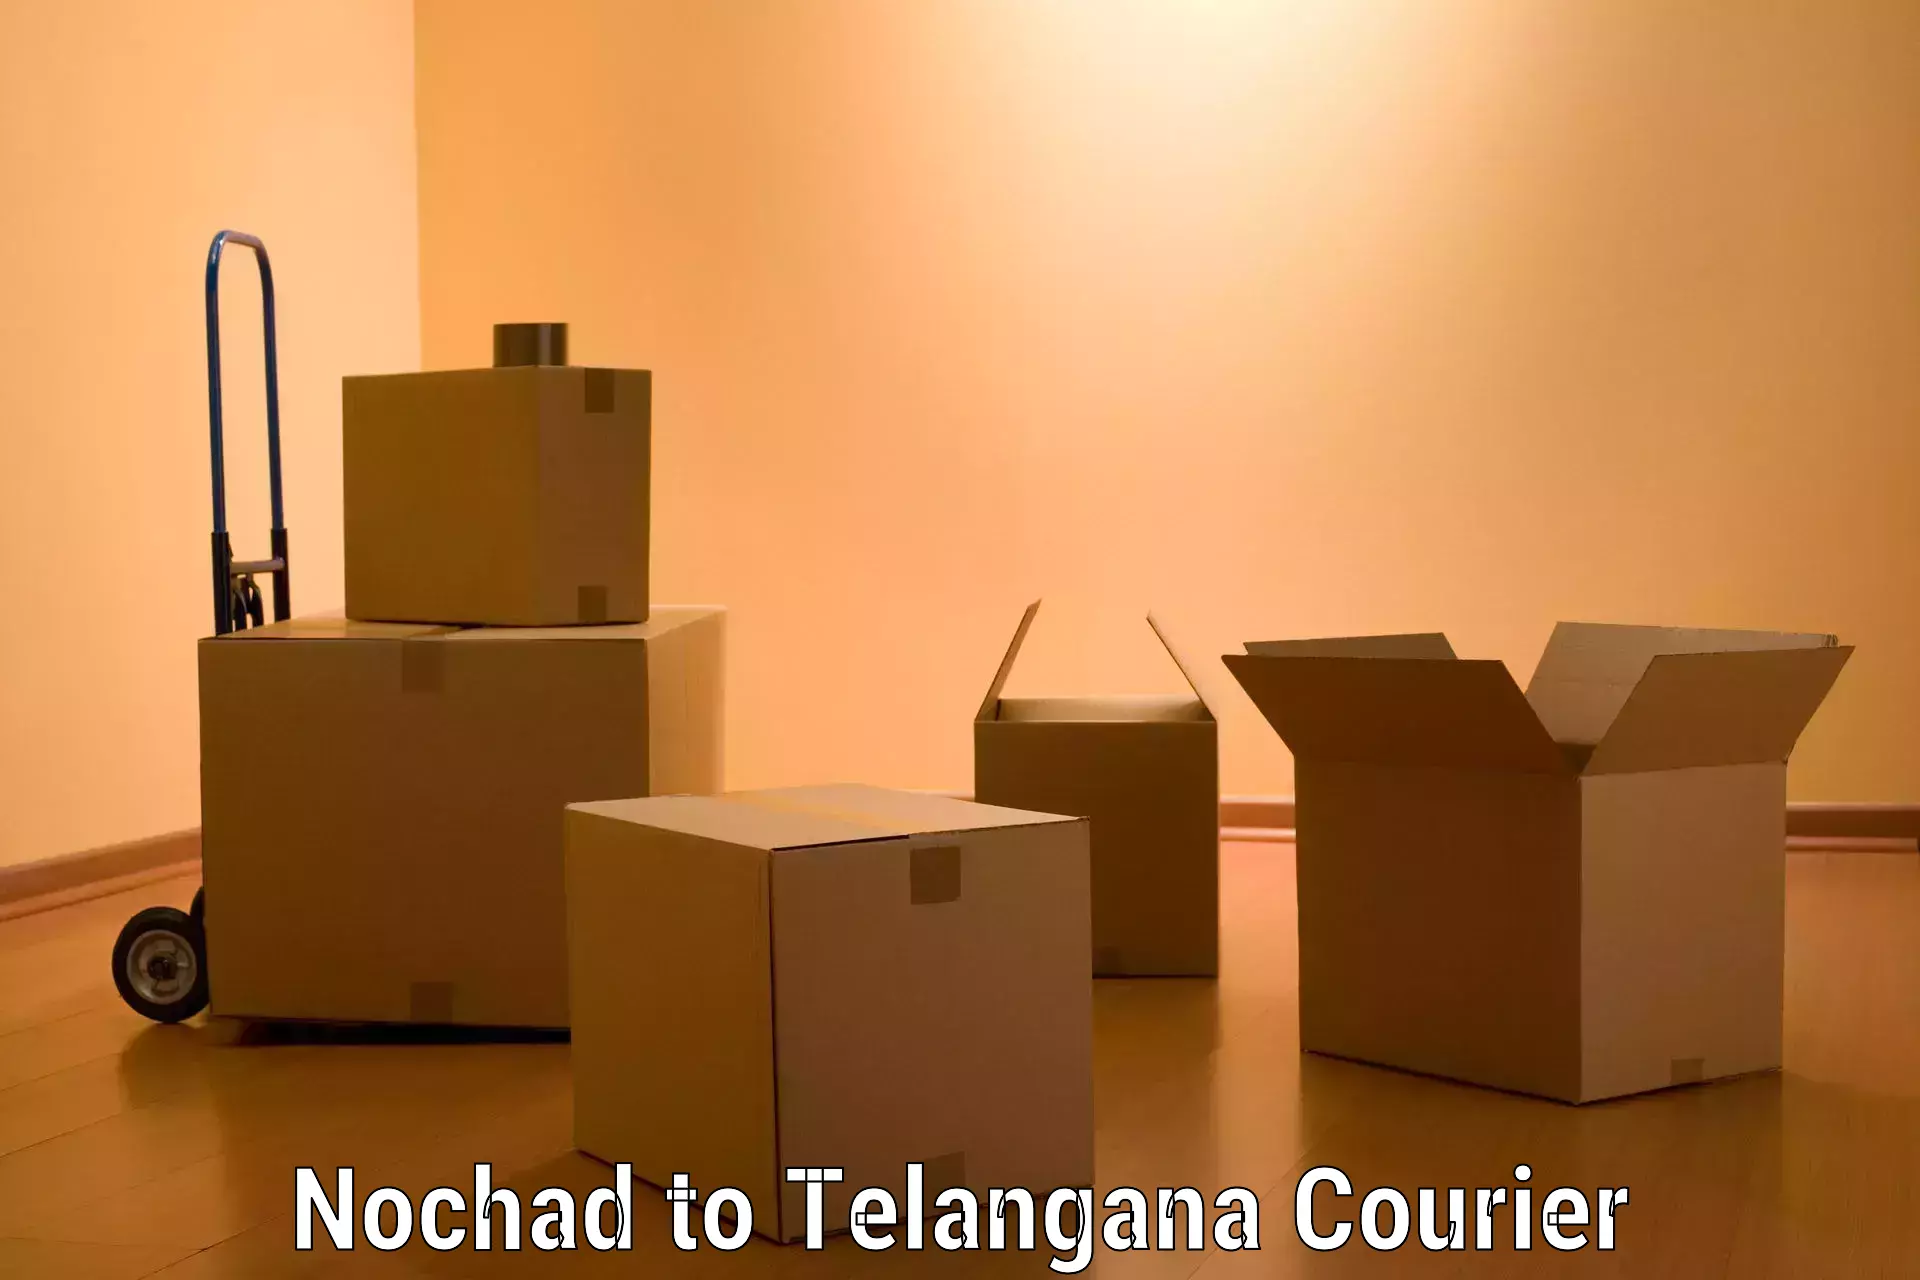 Furniture delivery service Nochad to Telangana